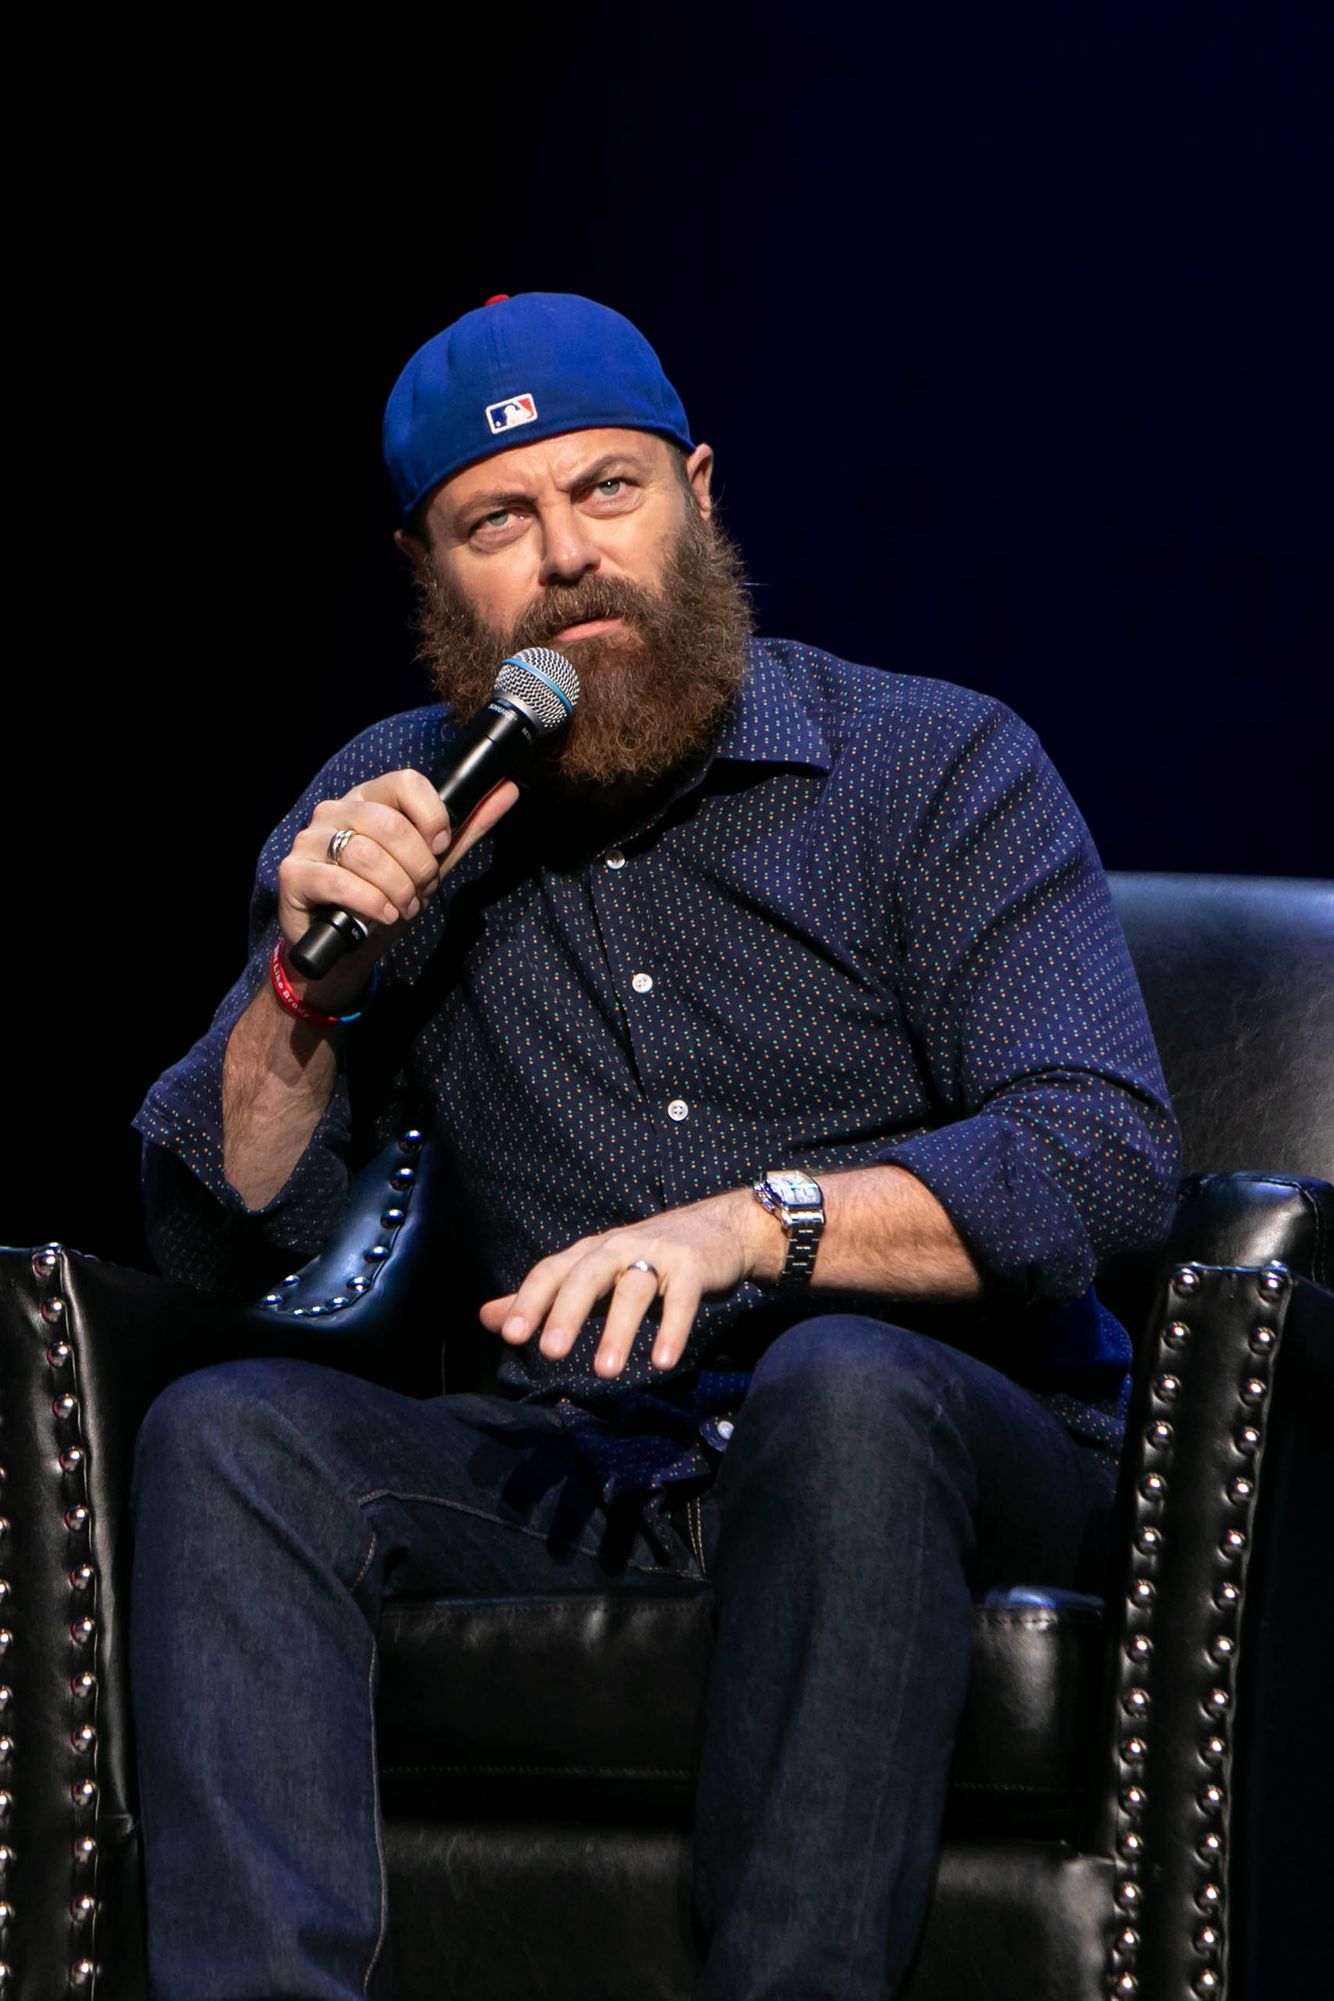 Nick Offerman By Chicago Celebrity Entertainment Event Photographer Jeff Schear